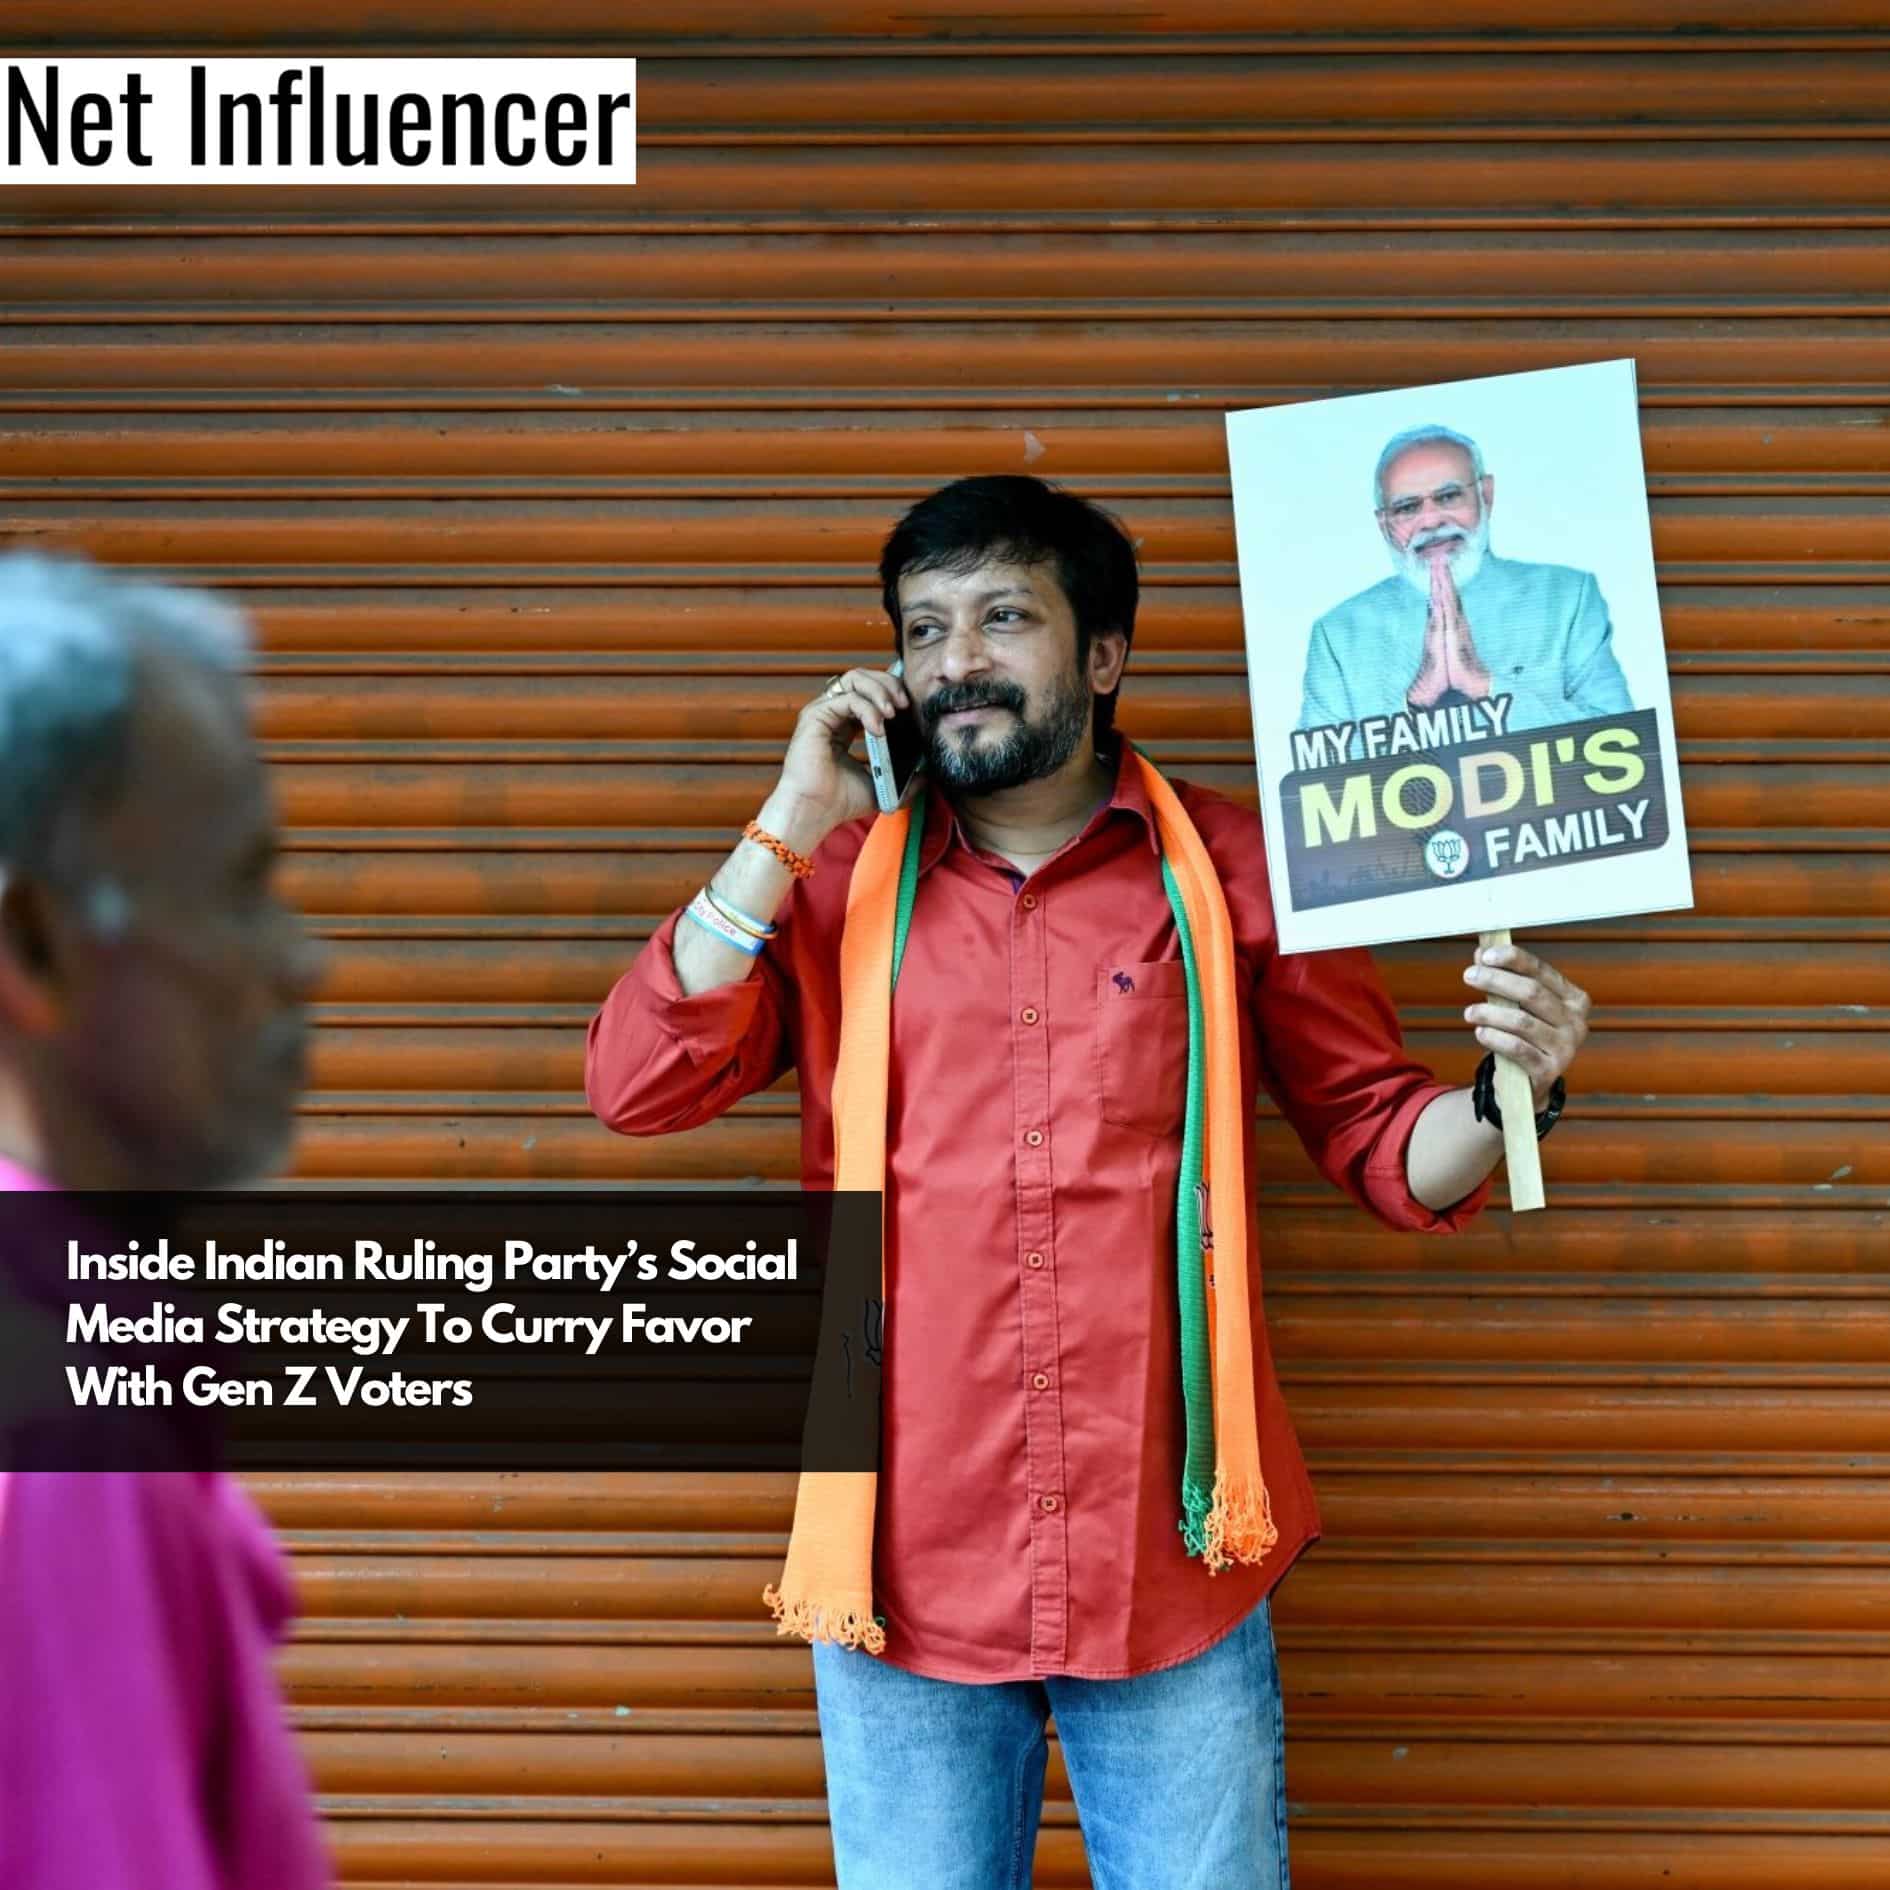 Inside Indian Ruling Party’s Social Media Strategy To Curry Favor With Gen Z Voters